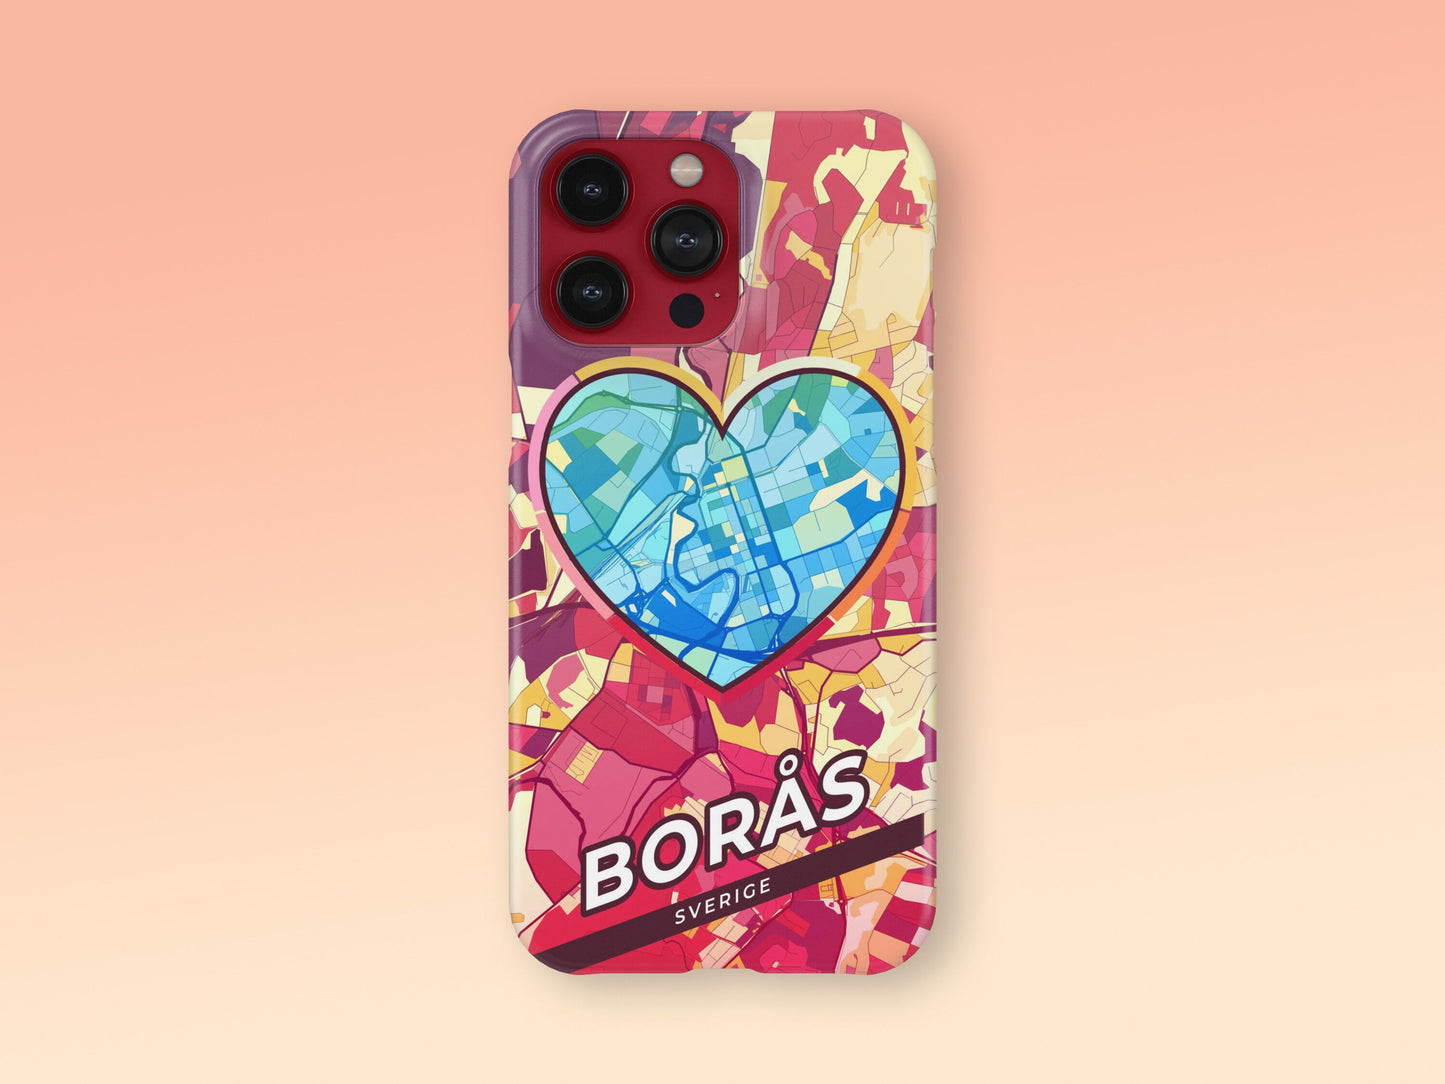 Borås Sweden slim phone case with colorful icon. Birthday, wedding or housewarming gift. Couple match cases. 2